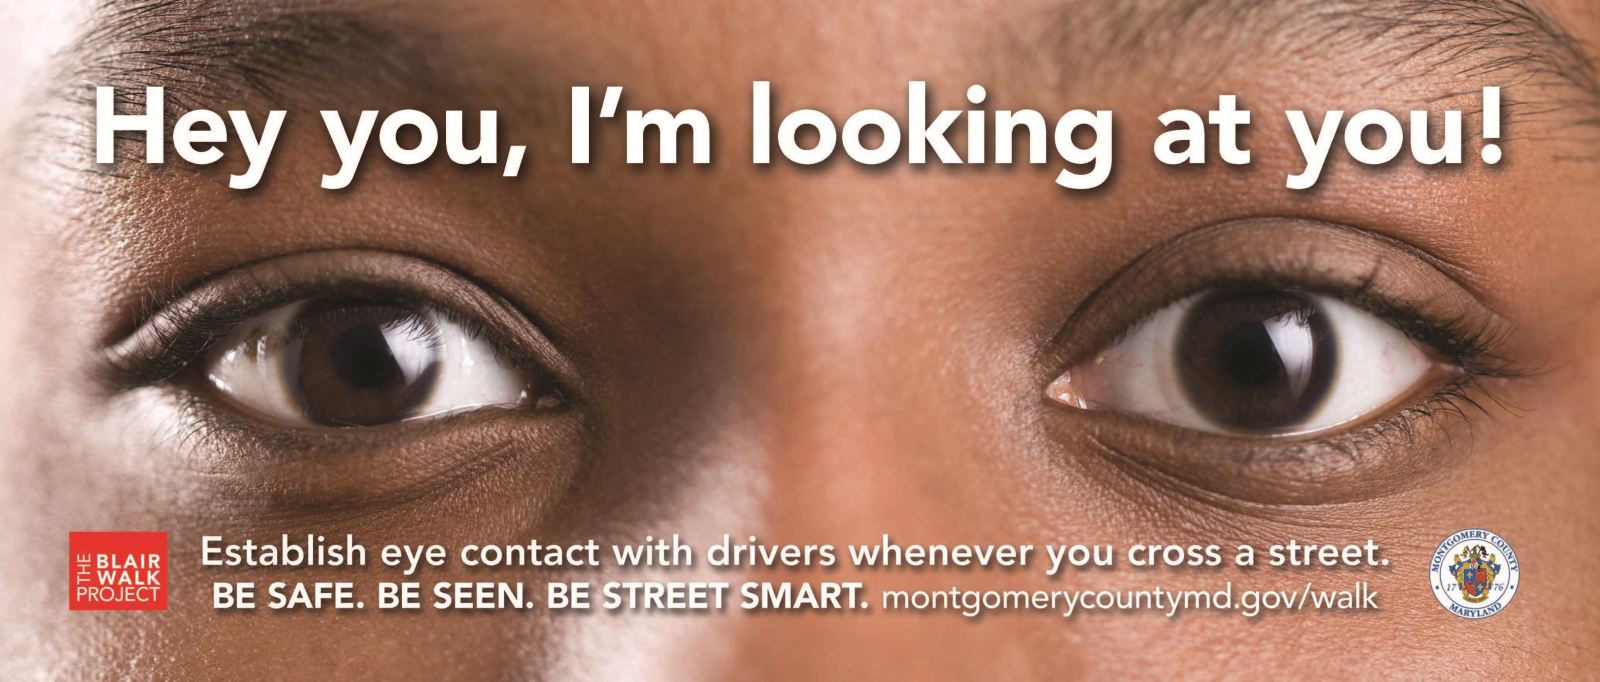 Montgomery County Best Eyes Campaign